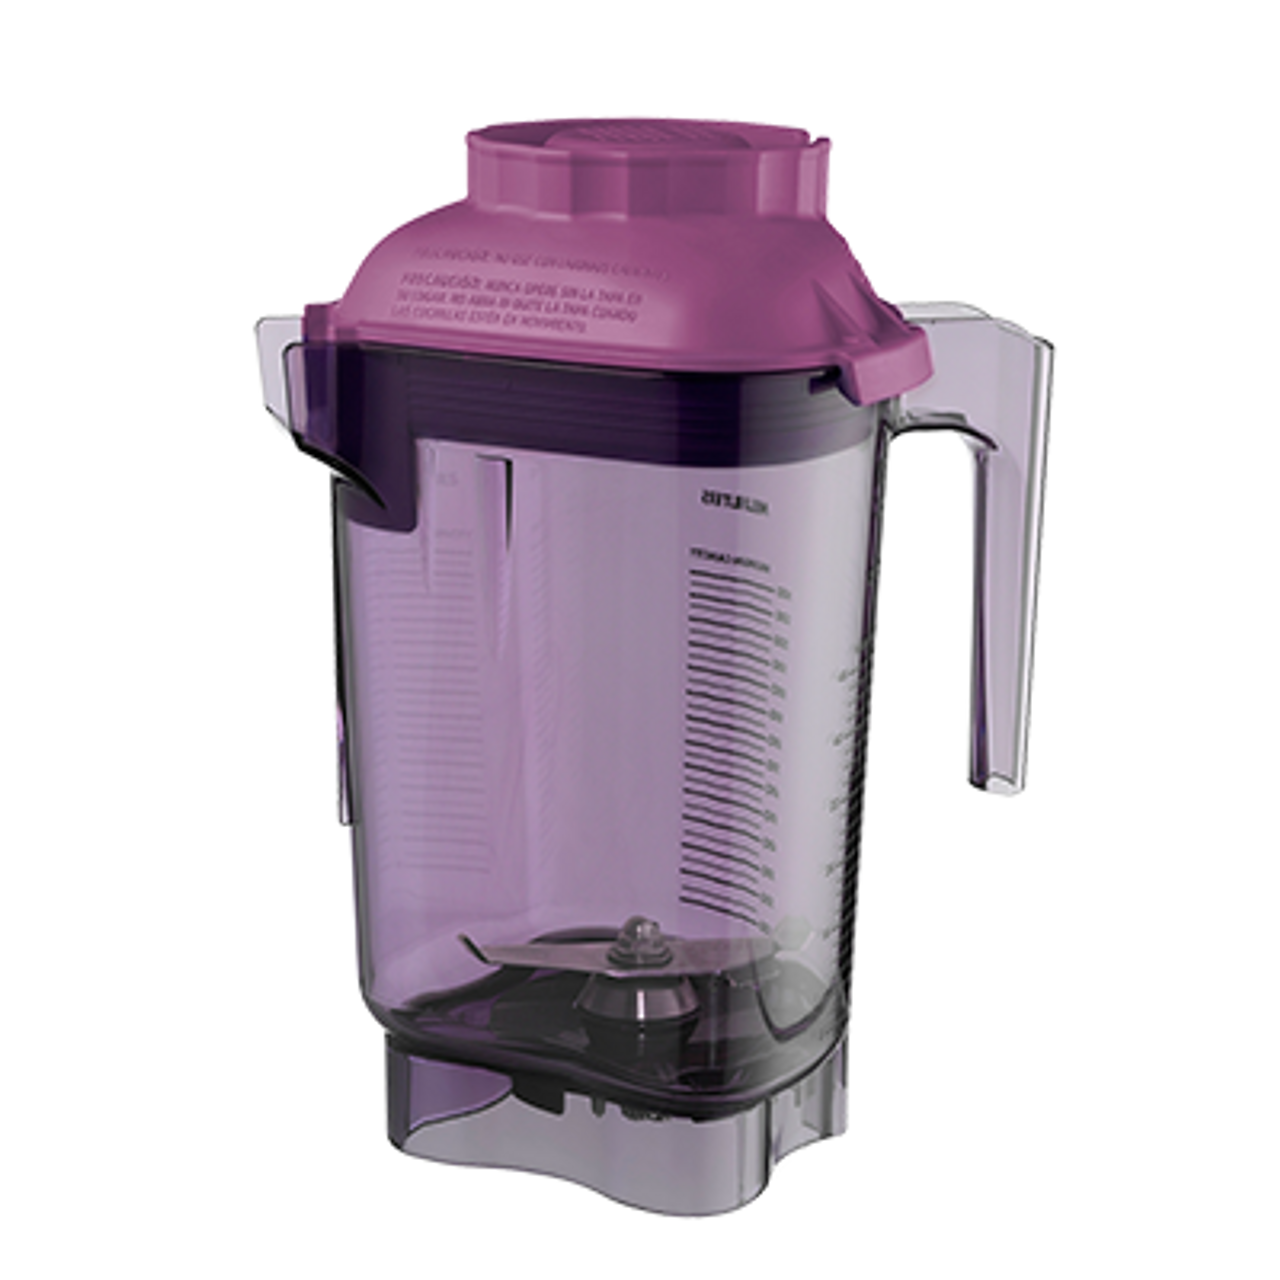 https://cdn11.bigcommerce.com/s-6mxrbbhtjl/images/stencil/1280x1280/products/641/8889/vitamix-58987-purple-color-coded-32-oz-container__75912.1597179348.png?c=1